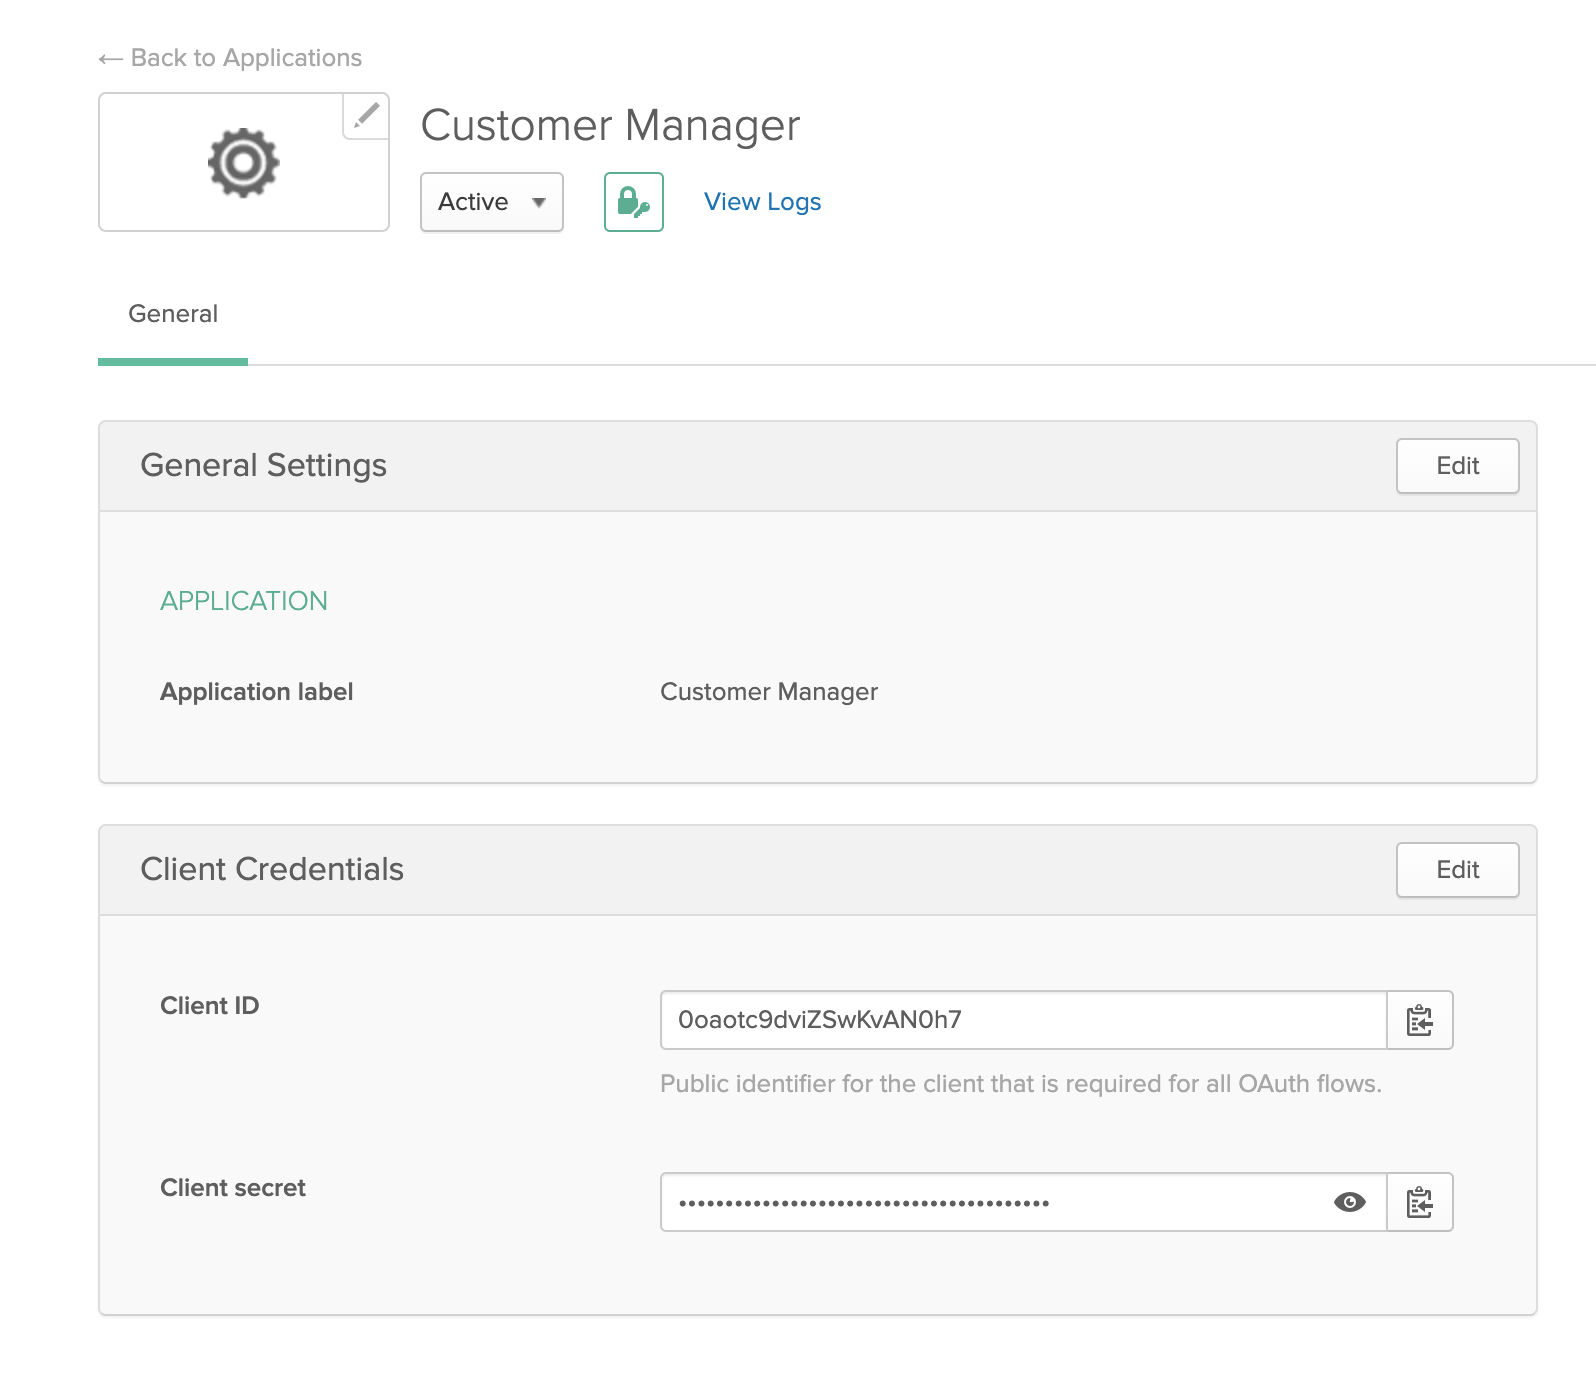 Customer manager application with client ID and secret